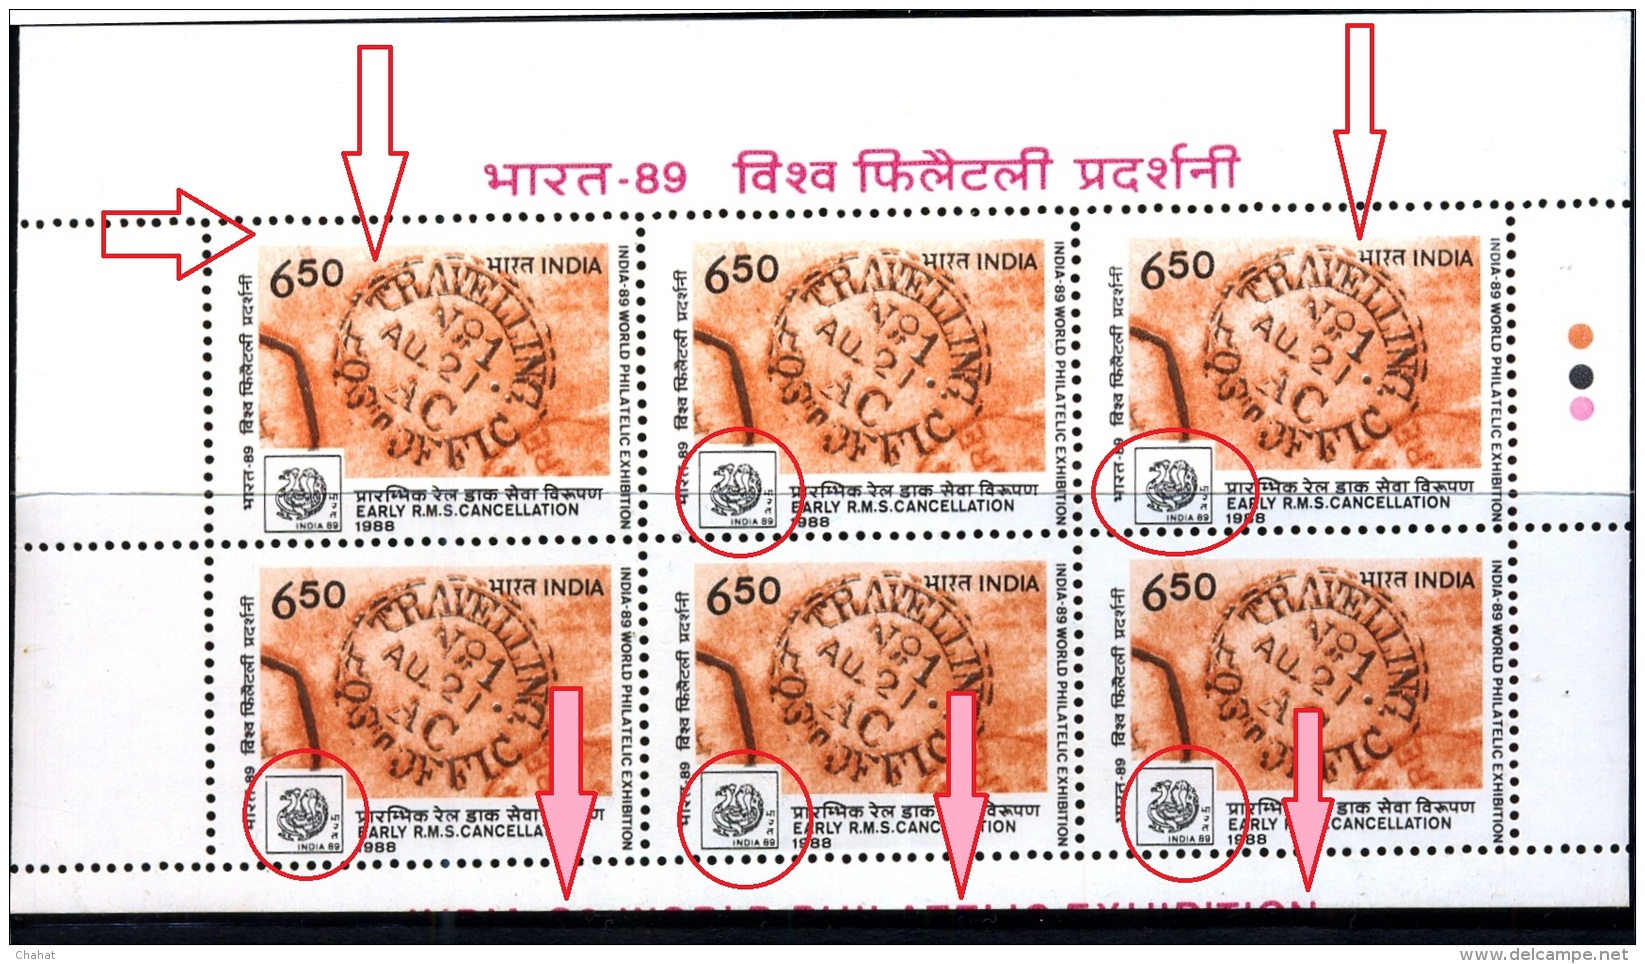 EARLY RMS CANCELLATIONS-ERROR-INDIA 89-WORLD PHILATELIC EXHIBITION-BOOKLET PANES-EXTREMELY SCARCE-MNH-M-146 - Plaatfouten En Curiosa